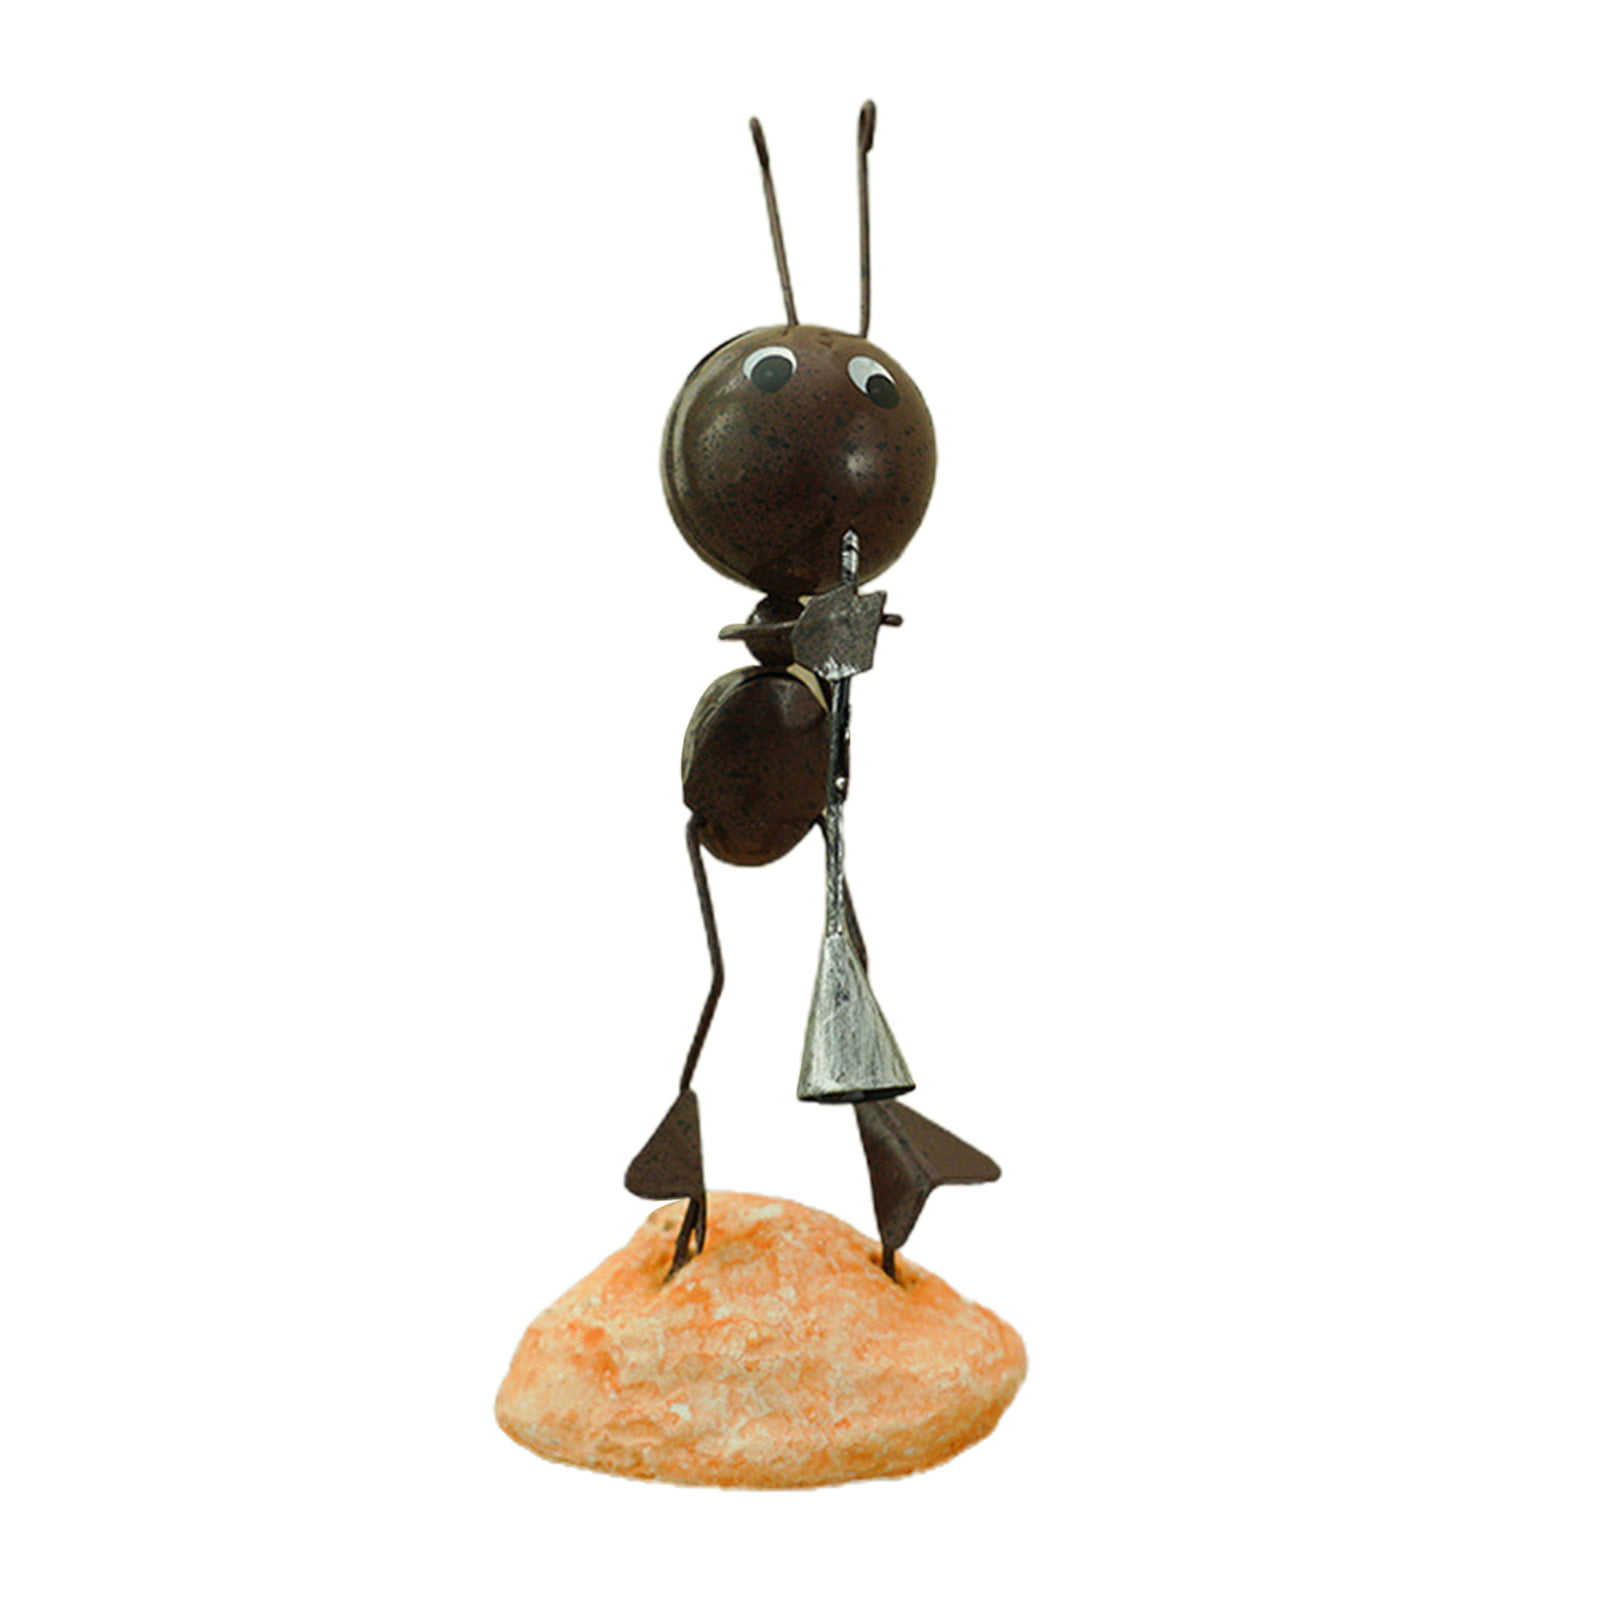 Details about   Creative Cartoon Resin Ant Figurine Crafts Model Home Tabletop Ornaments 